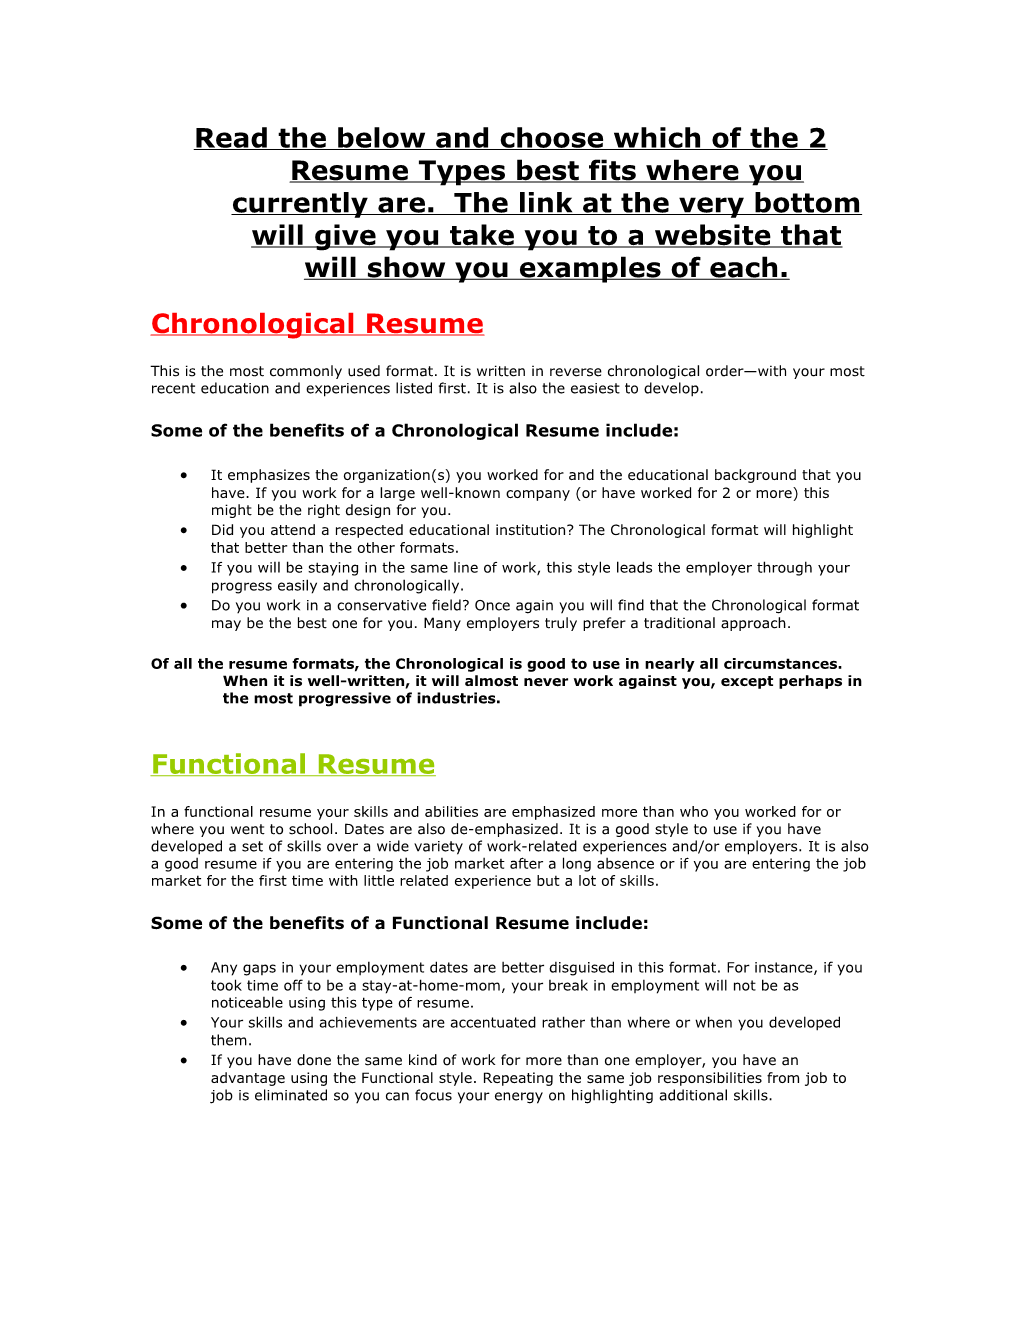 Some of the Benefits of a Chronological Resume Include